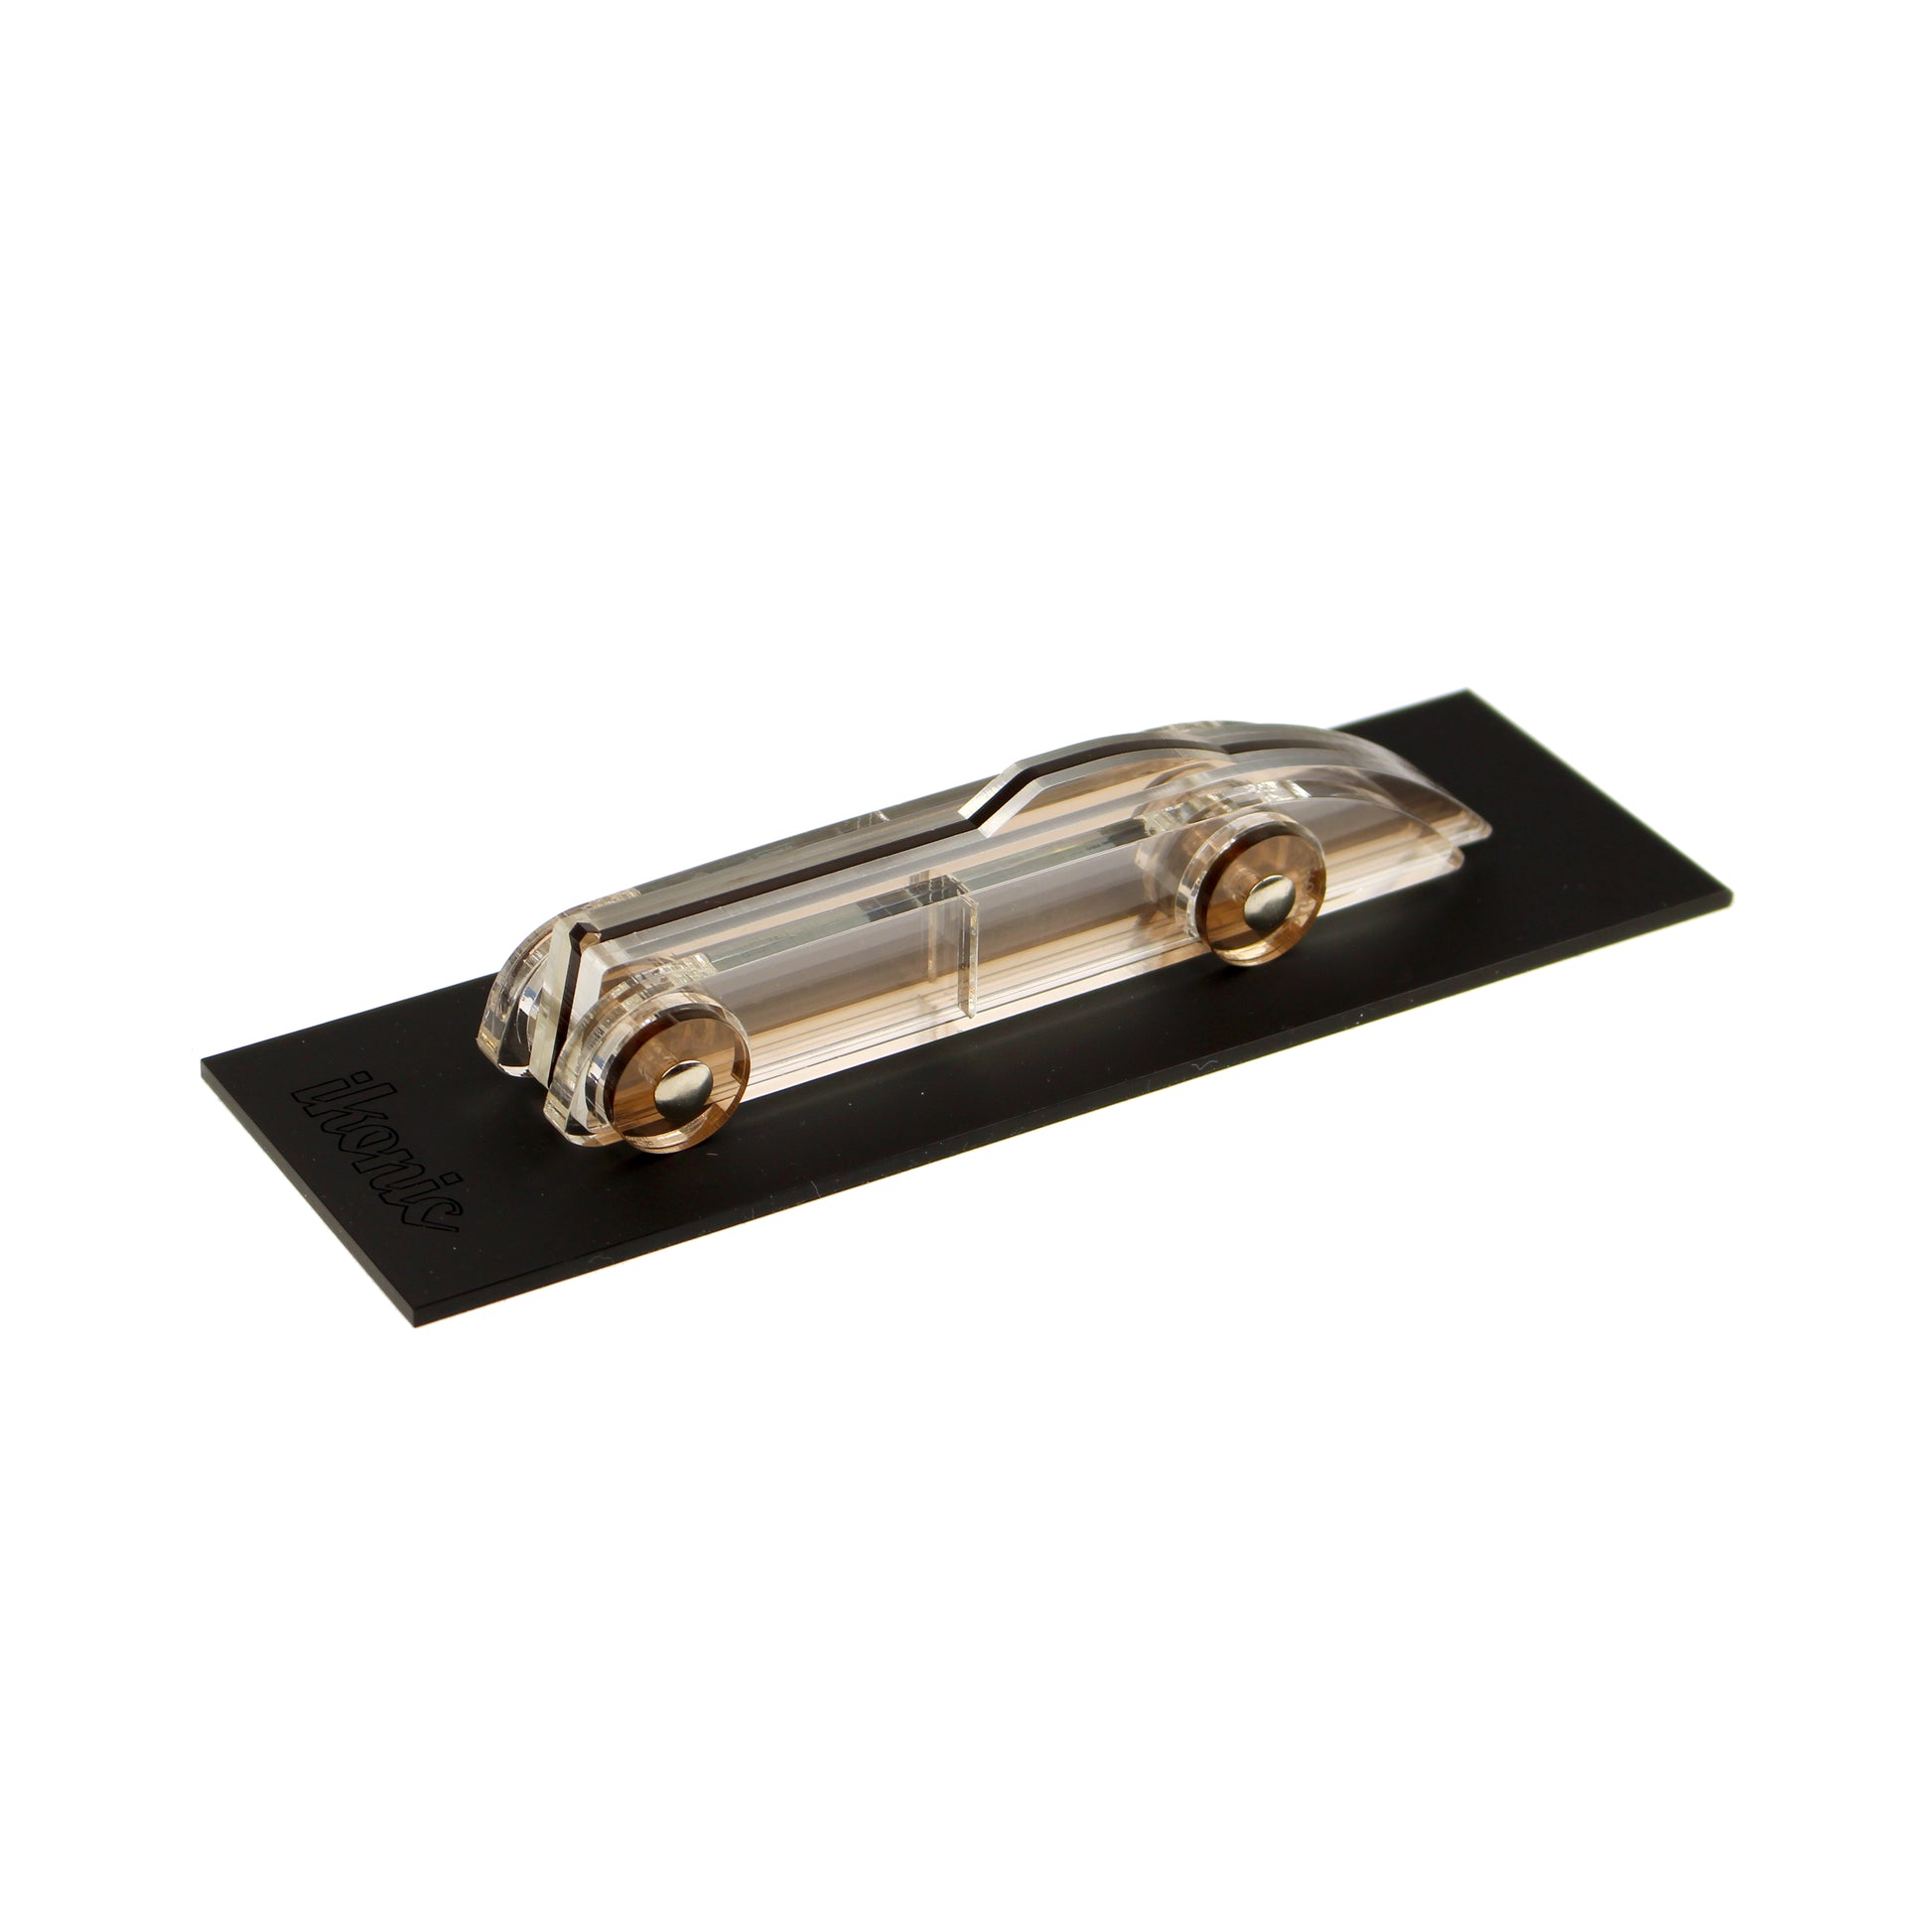 Lucite Car Small #1 Smoke Construction Set Toys beamalevich architecture gift design gift art gift